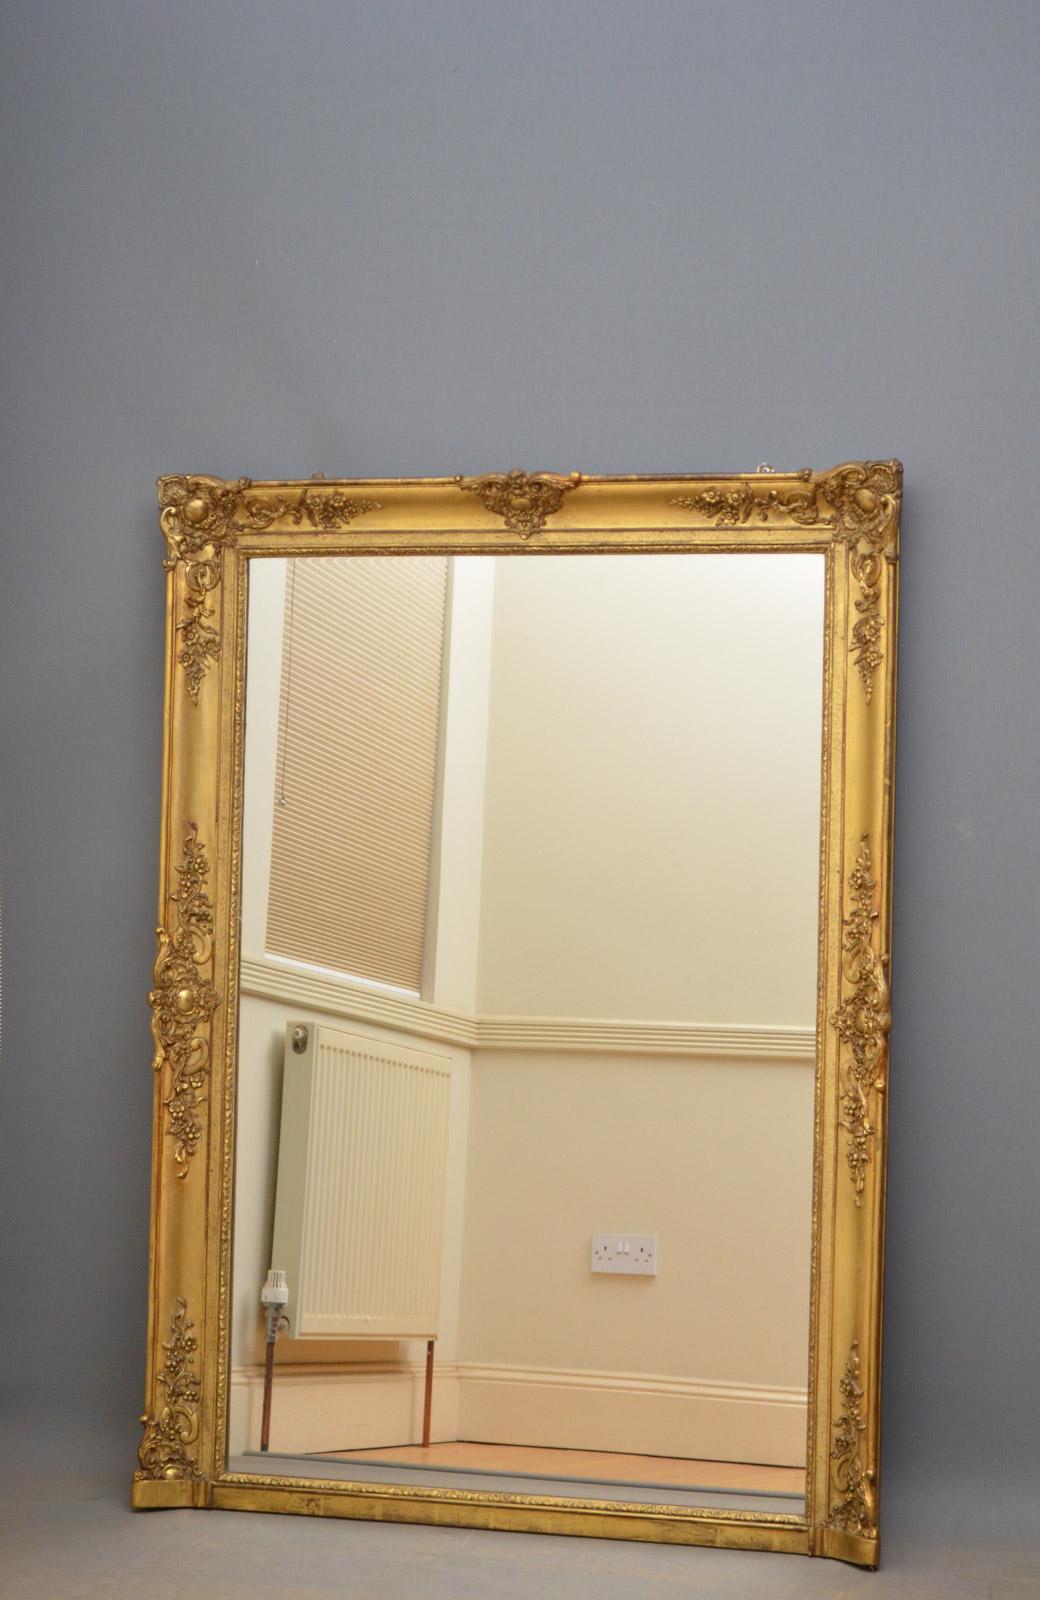 Sn4361, a large giltwood floor standing or overmantle mirror with original mirror plate with some foxing in finely carved frame, all in wonderful original condition throughout, ready to place at home, circa 1880.
Measures: H 60